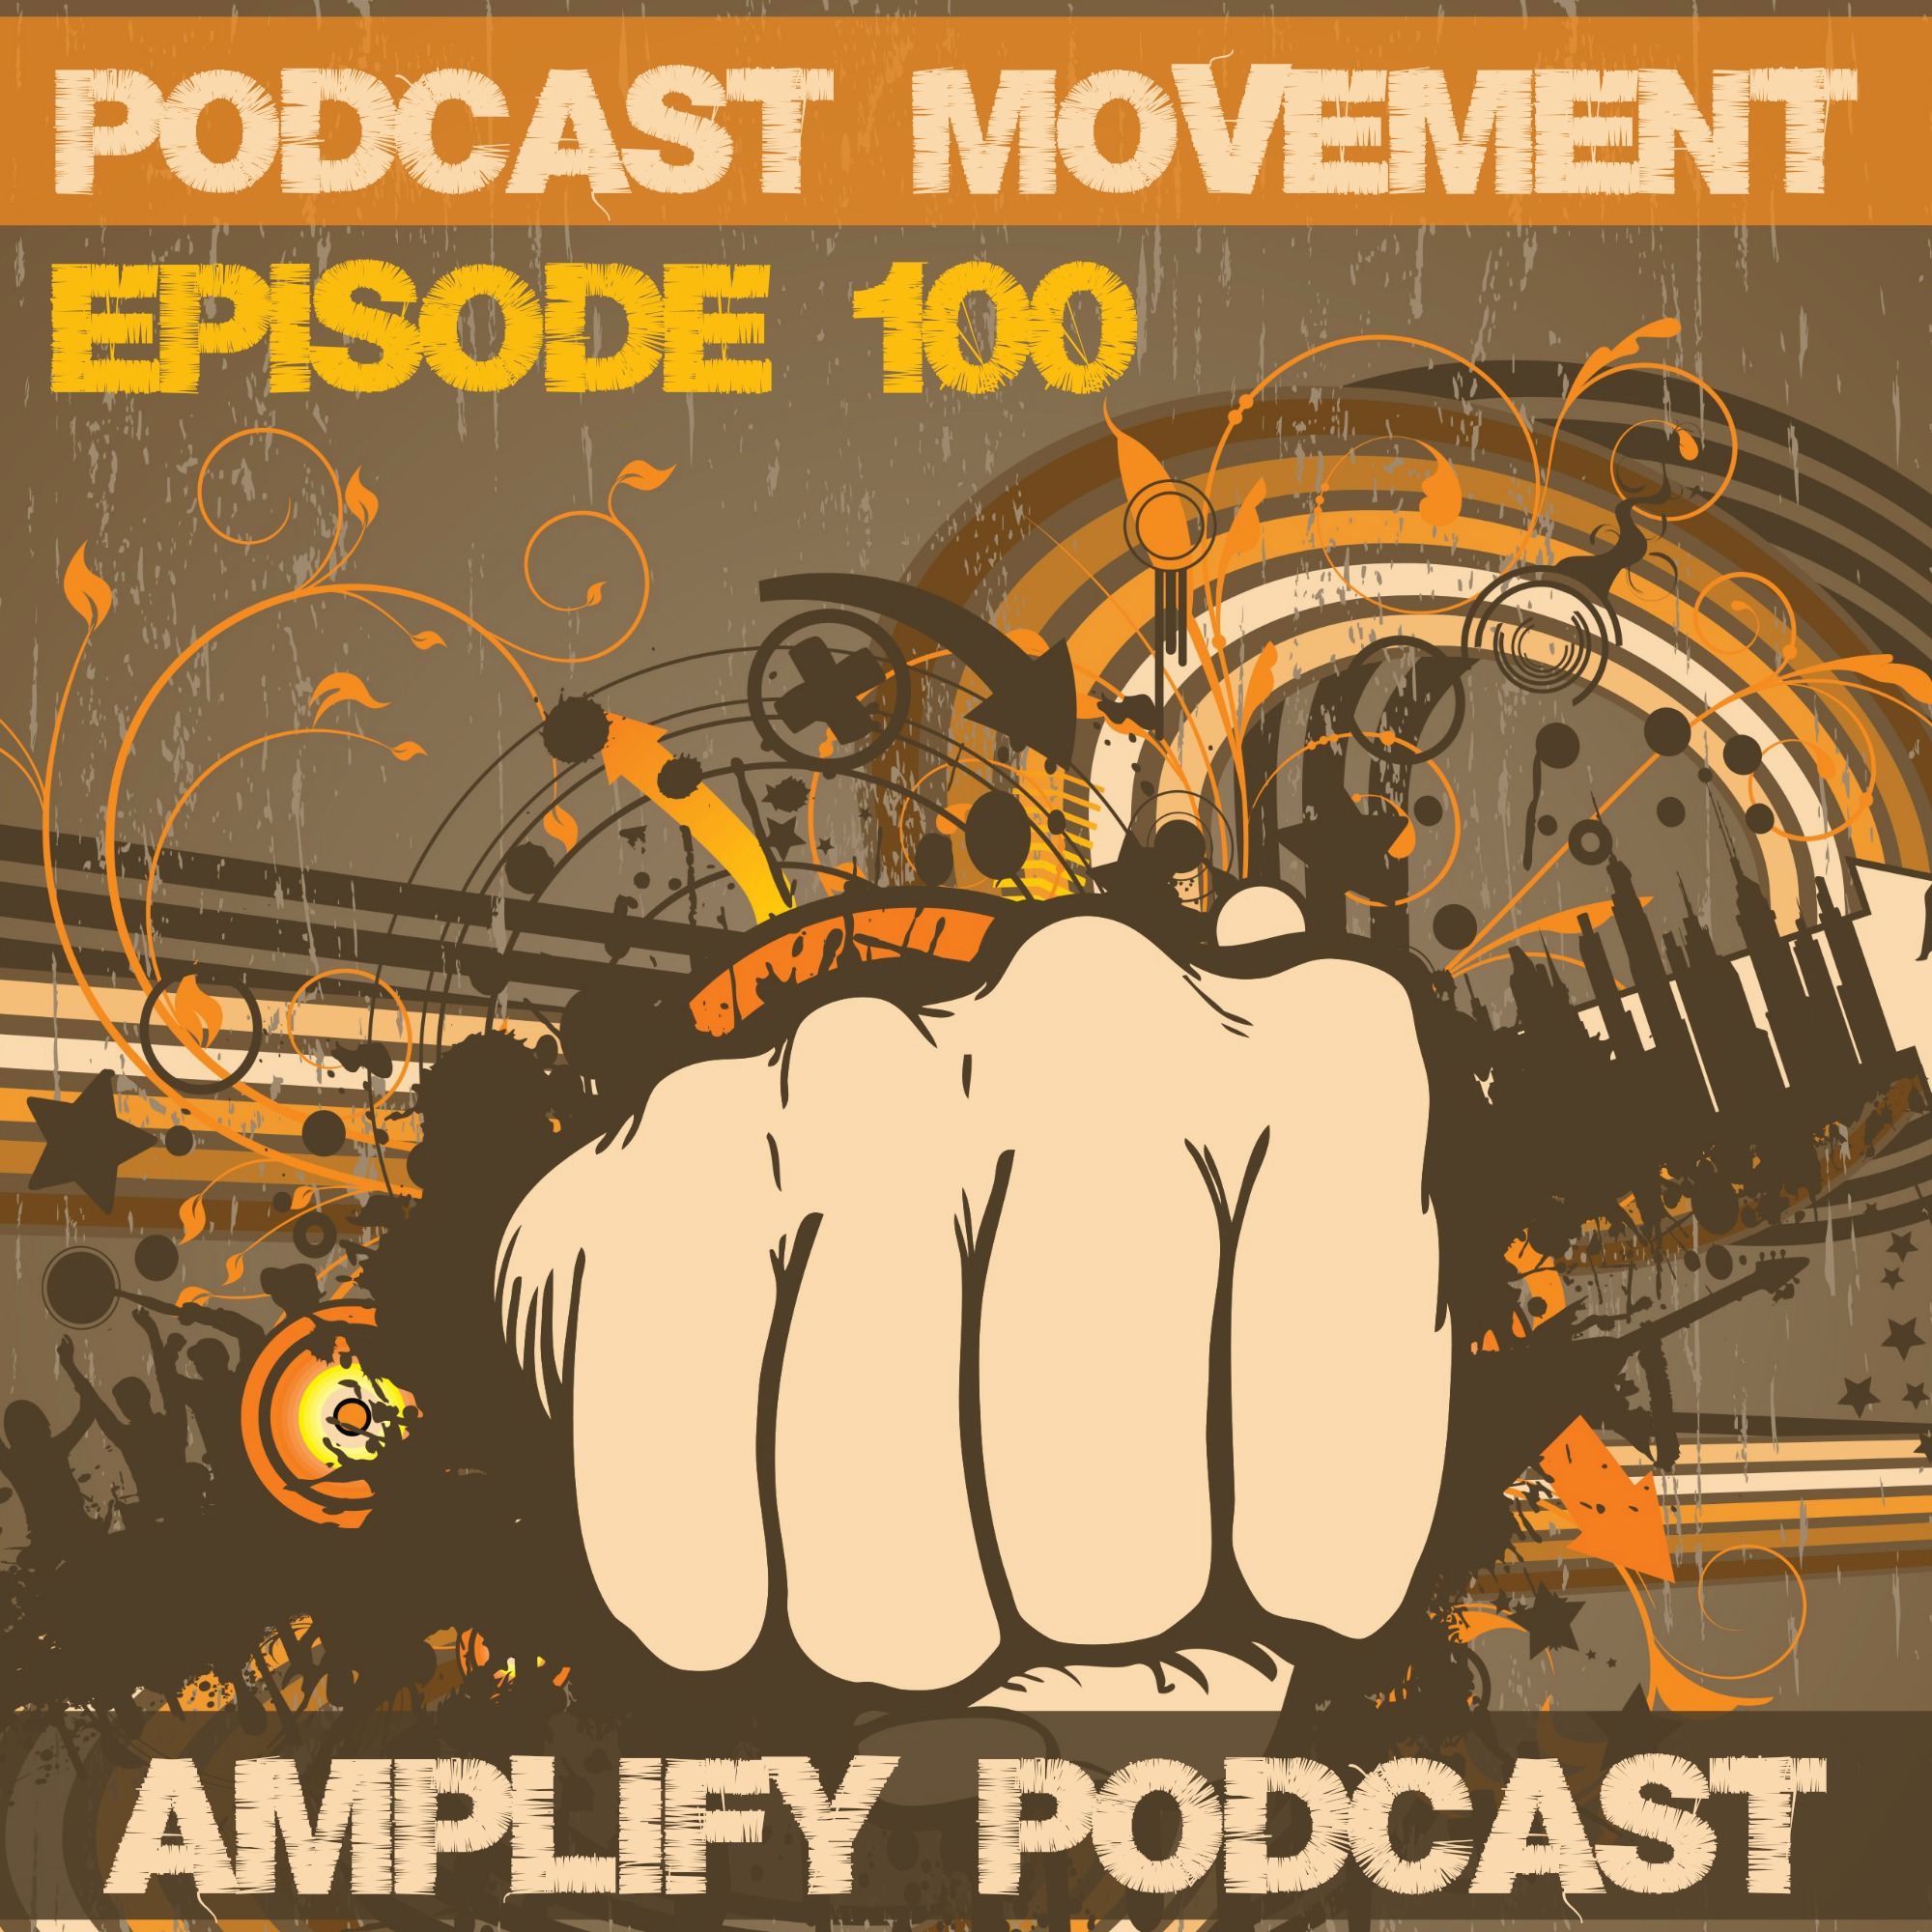 You are currently viewing The Special Podcast Movement Edition of Amplify